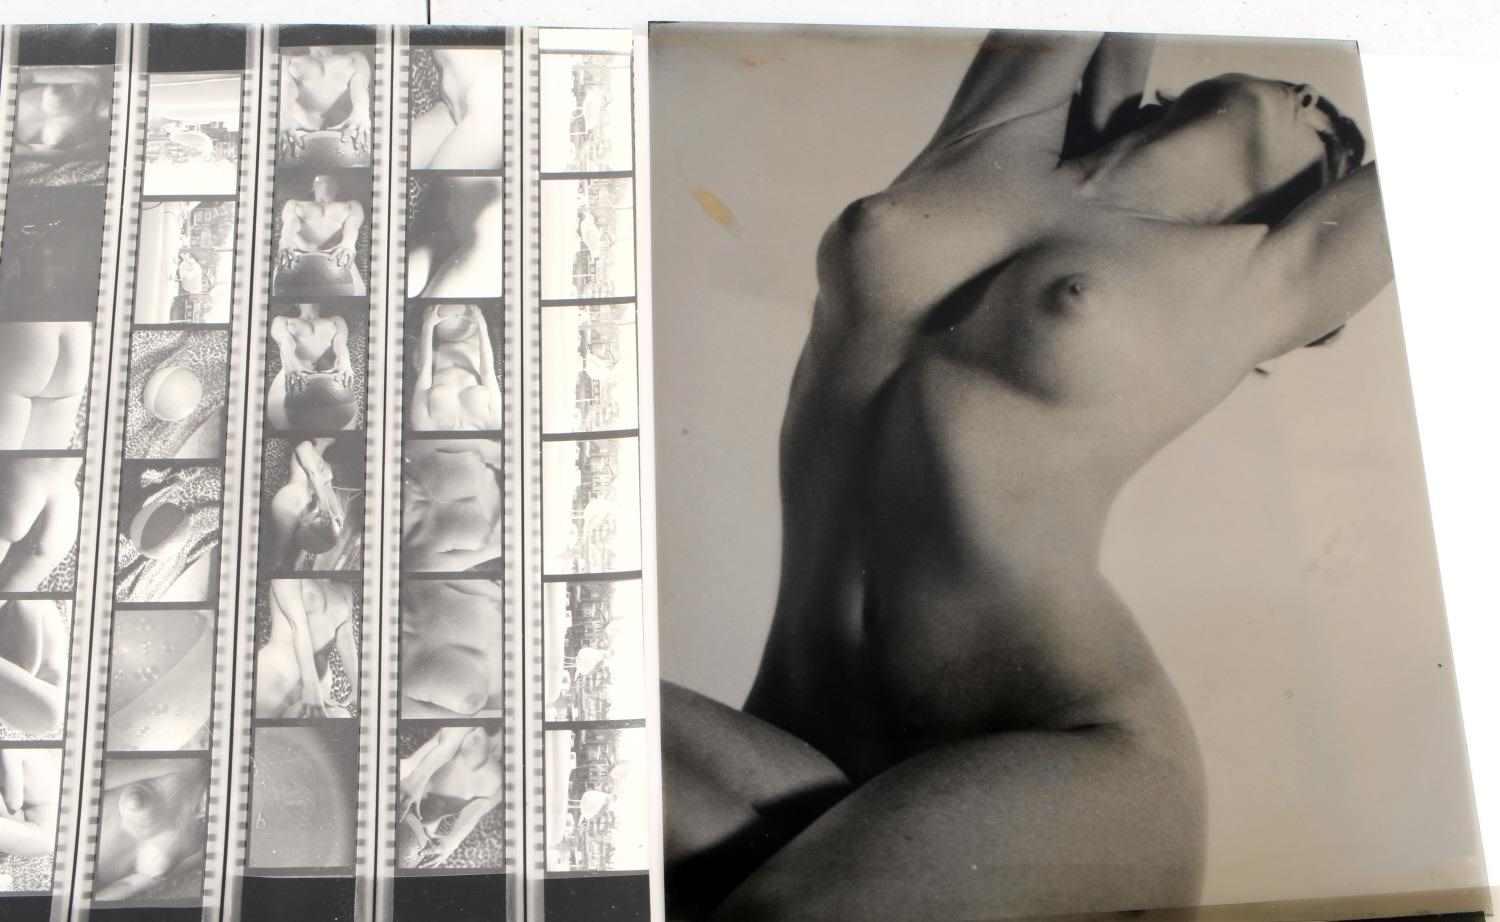 COLLECTION OF VINTAGE FEMALE NUDE PHOTO NEGATIVES